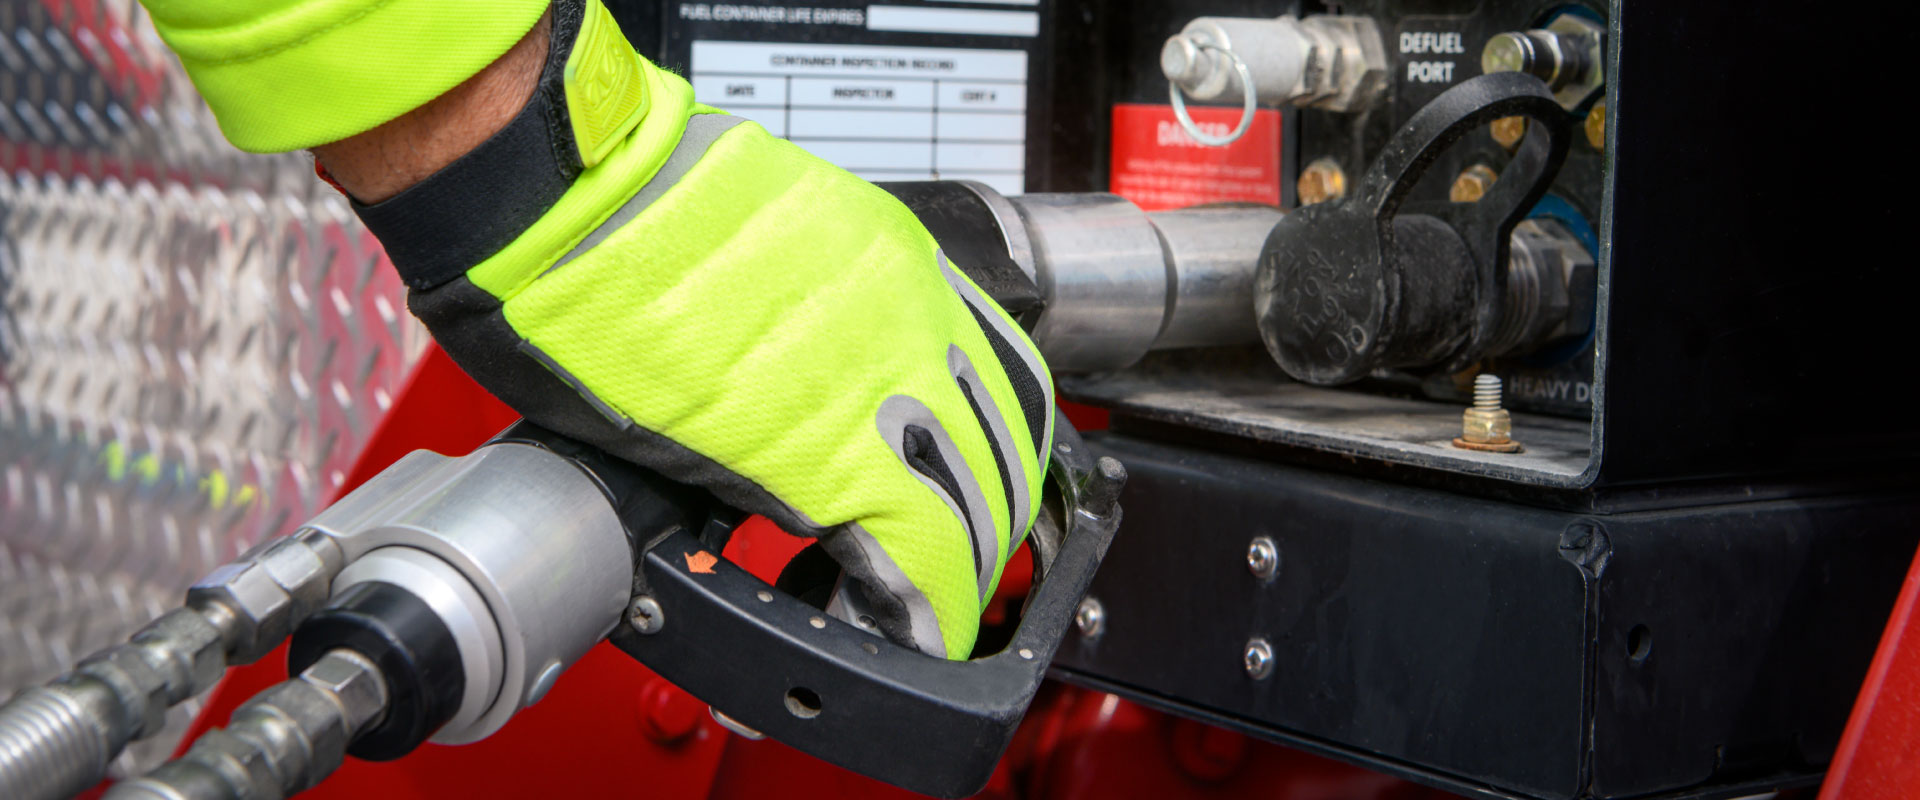 A hand in a yellow glove grasps a fuel handle as it is placed into the fuel location in a vehicle.